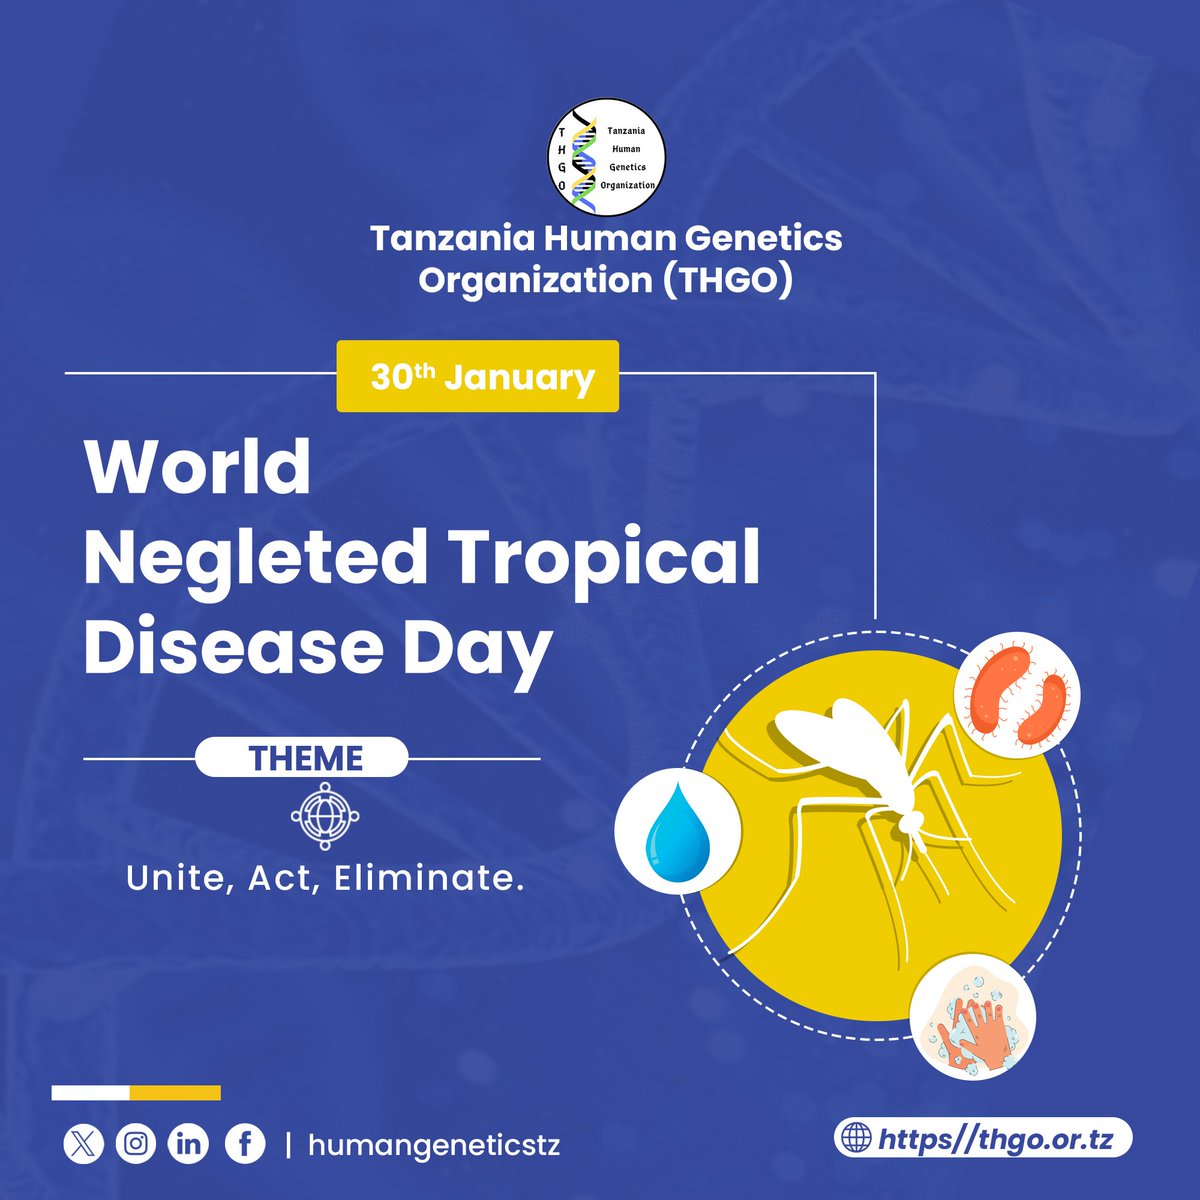 It's World #NTD today! 

🏷️A call for public attention to increase access and proper fund allocation to #NTD services and spreading global awareness on #NTDs

Unite. Act. Eliminate #NTDs

#WorldNTDDay 
#NTDawareness 
#humangenetics
#humangeneticstz